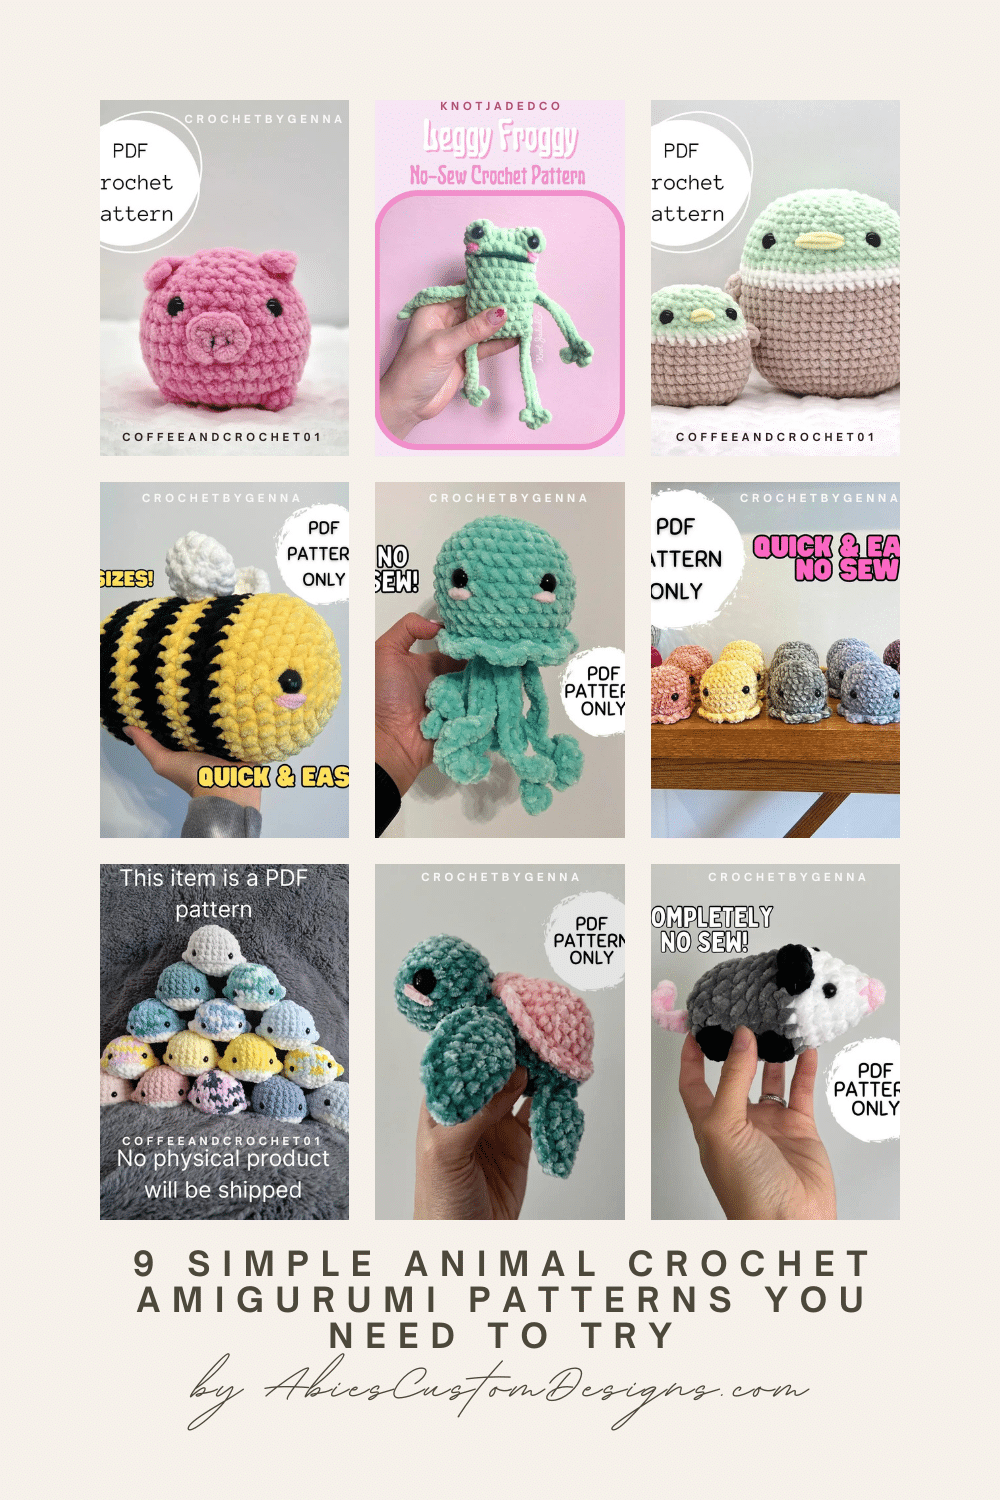 9 Simple Animal Crochet Amigurumi Patterns You Need to Try